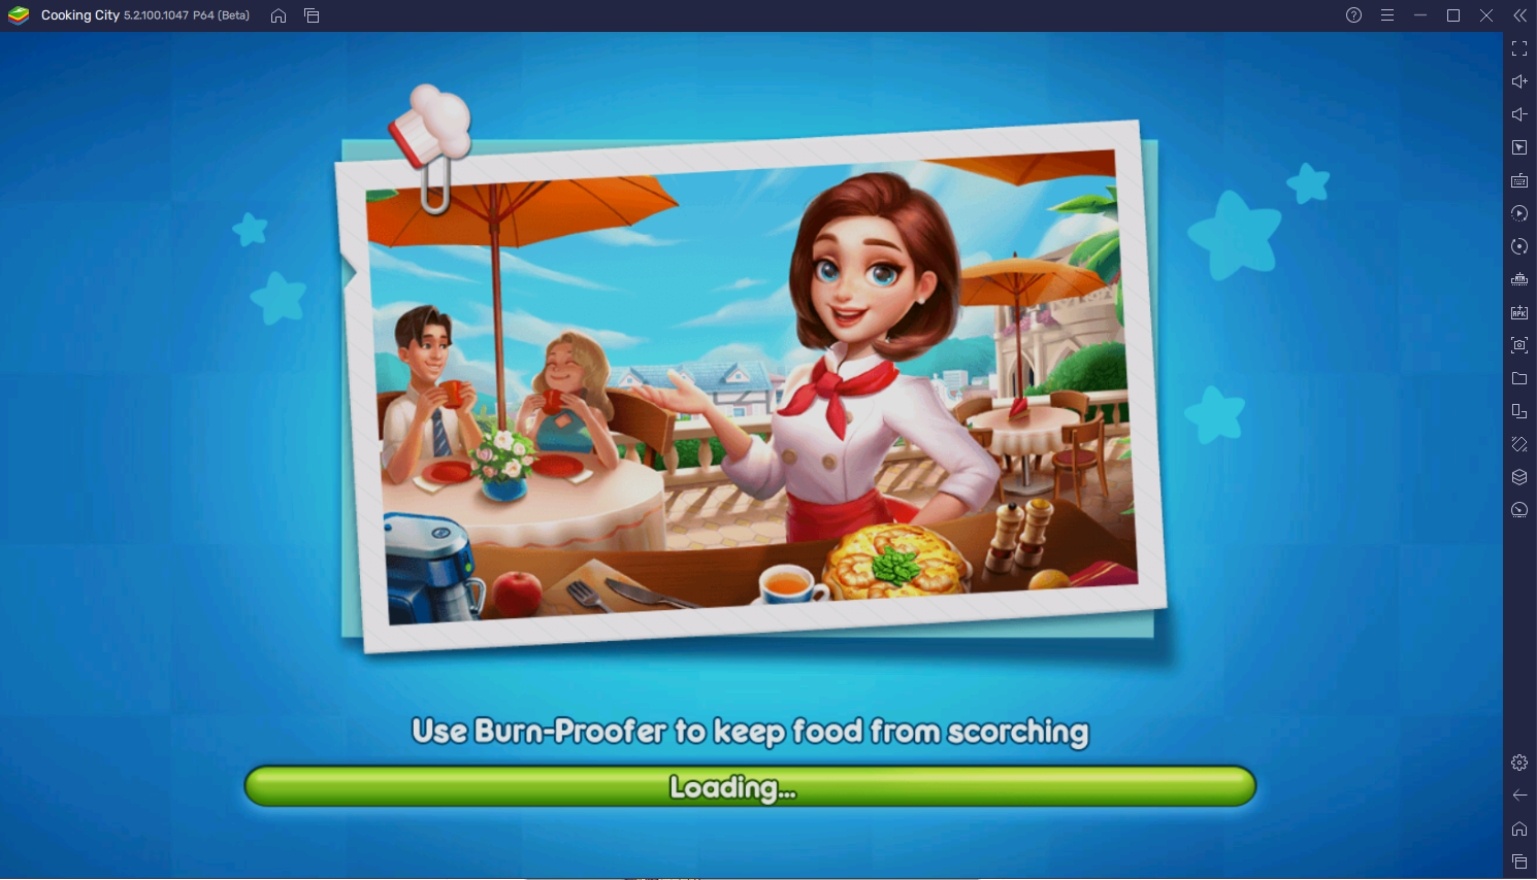 BlueStacks' Beginners Guide to Playing Cooking City: Restaurant Games